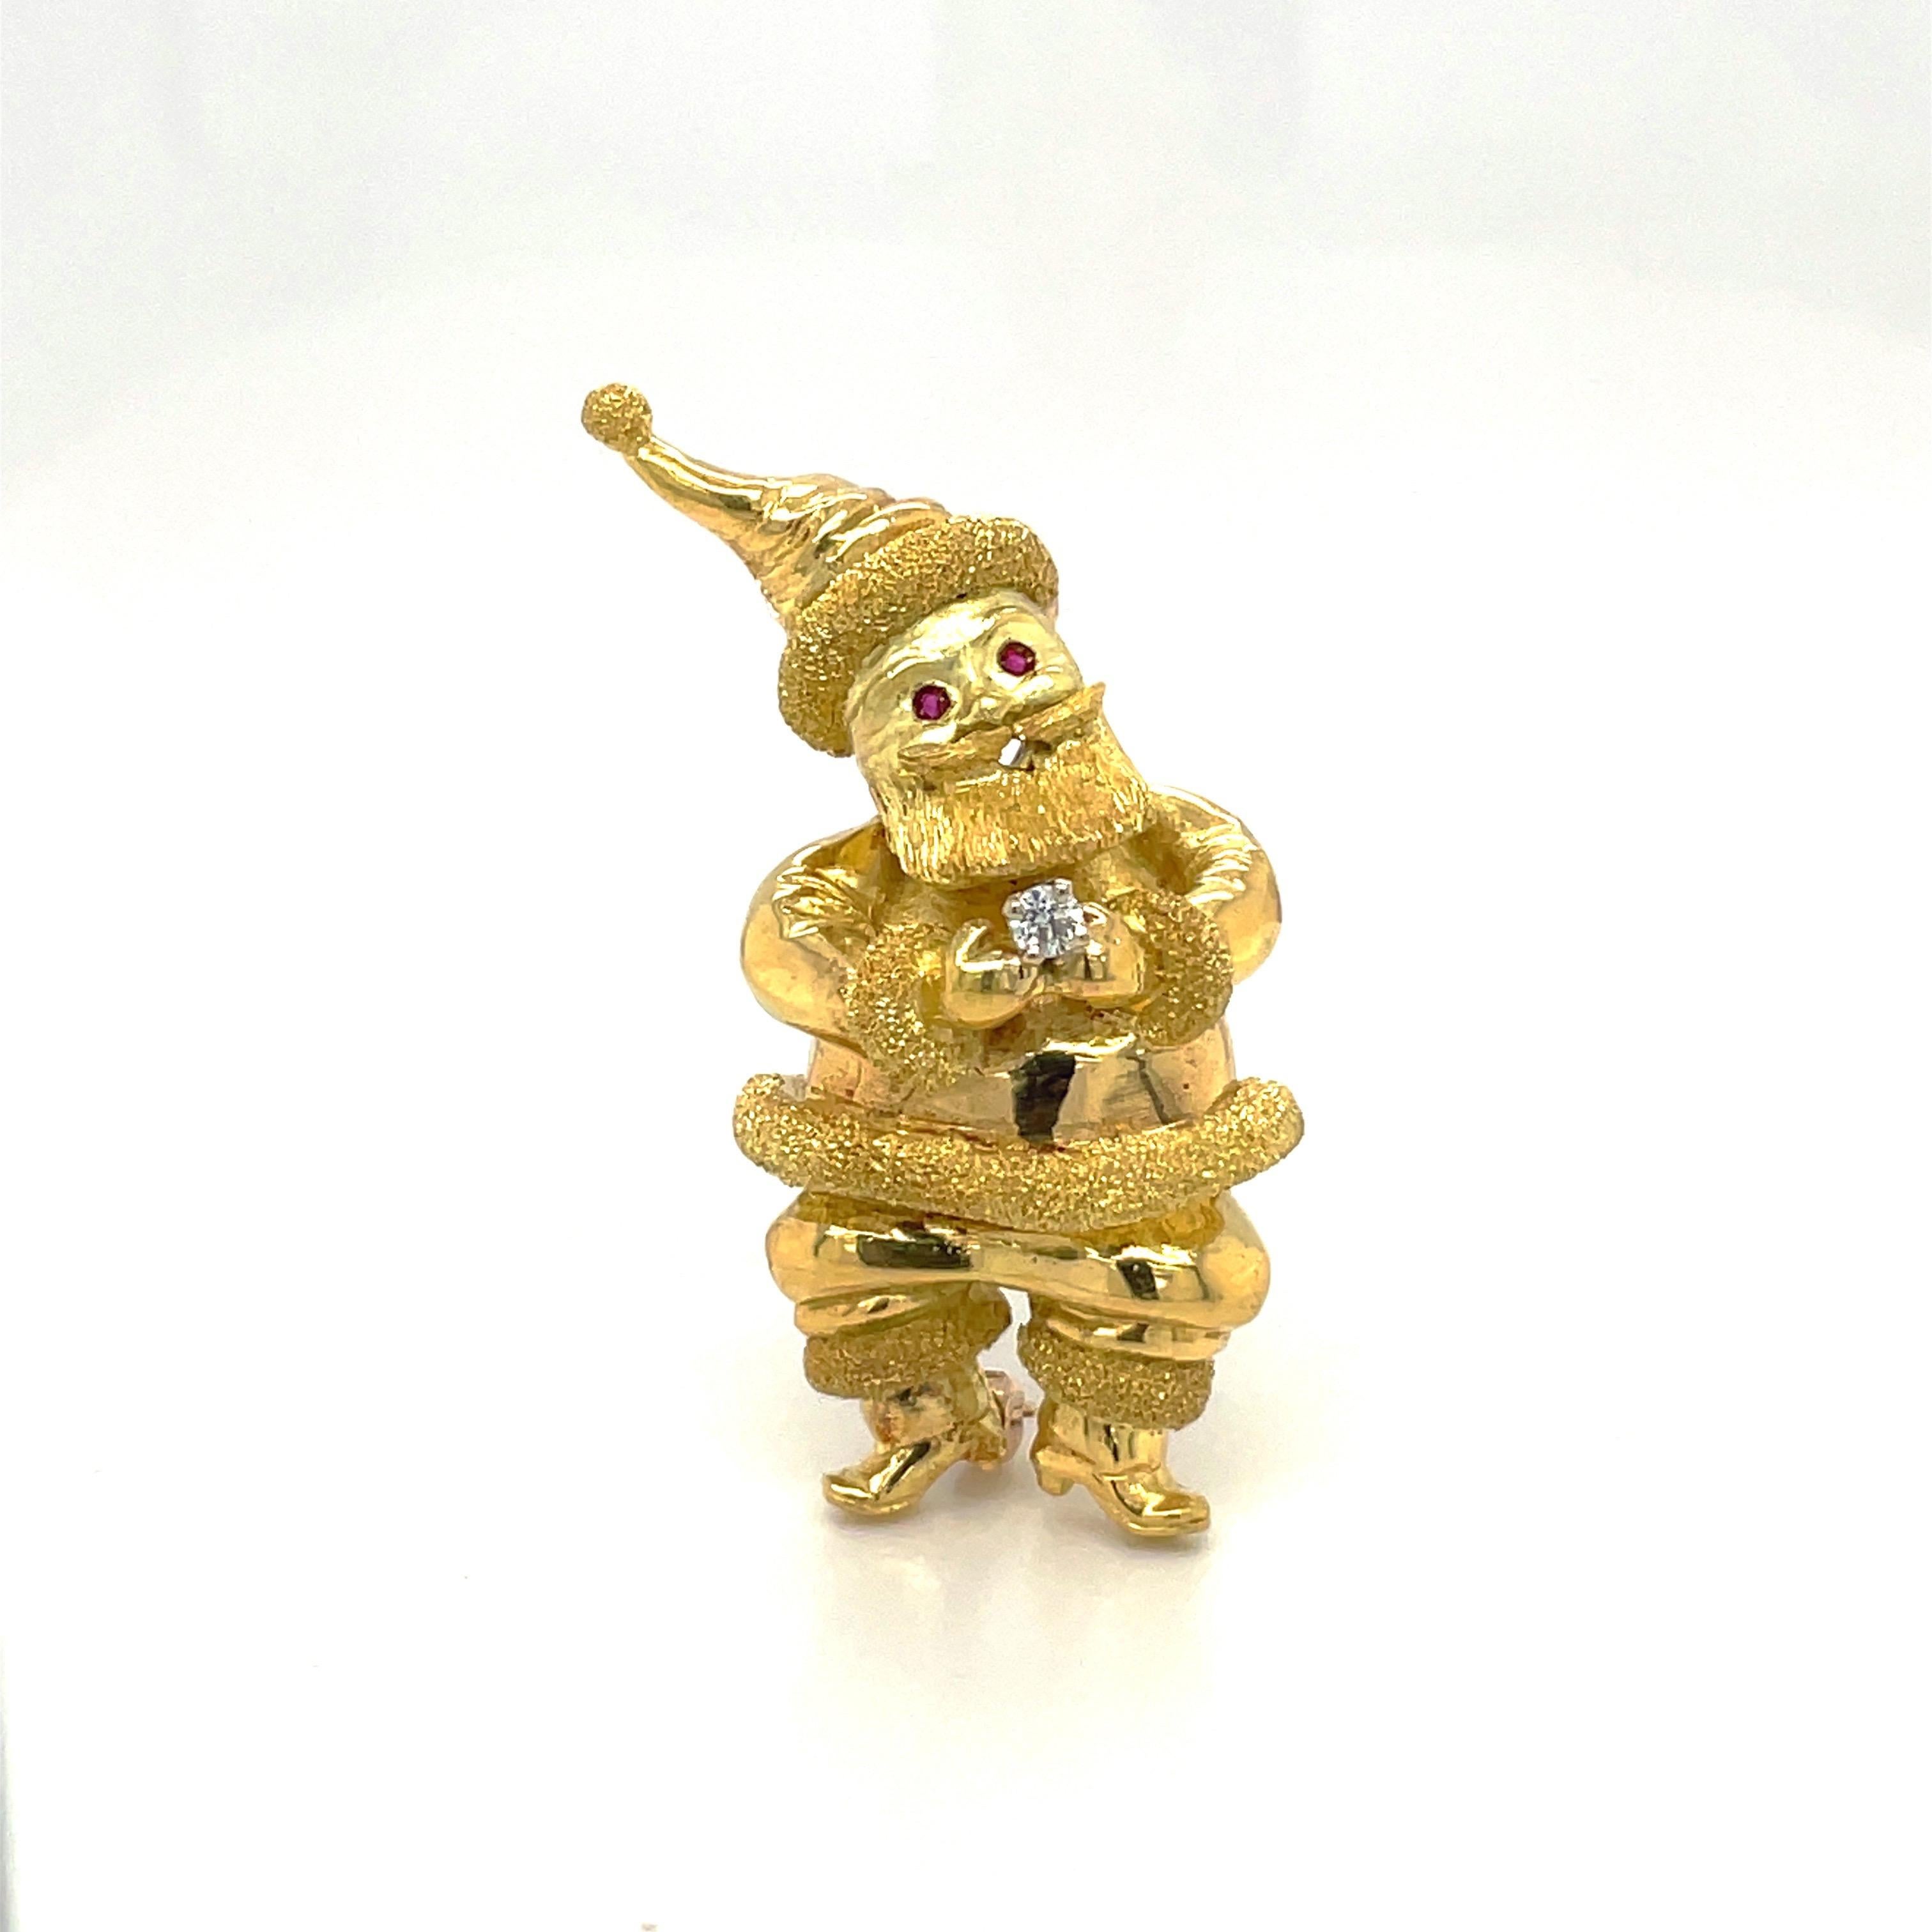 A jolly 18 karat yellow gold Santa Claus brooch. The brooch is designed with mixed finishes of sand blasting and high polish giving Santa Claus lovely depth. He has ruby eyes and holds a single round diamond in his hands. The brooch measures 1.5